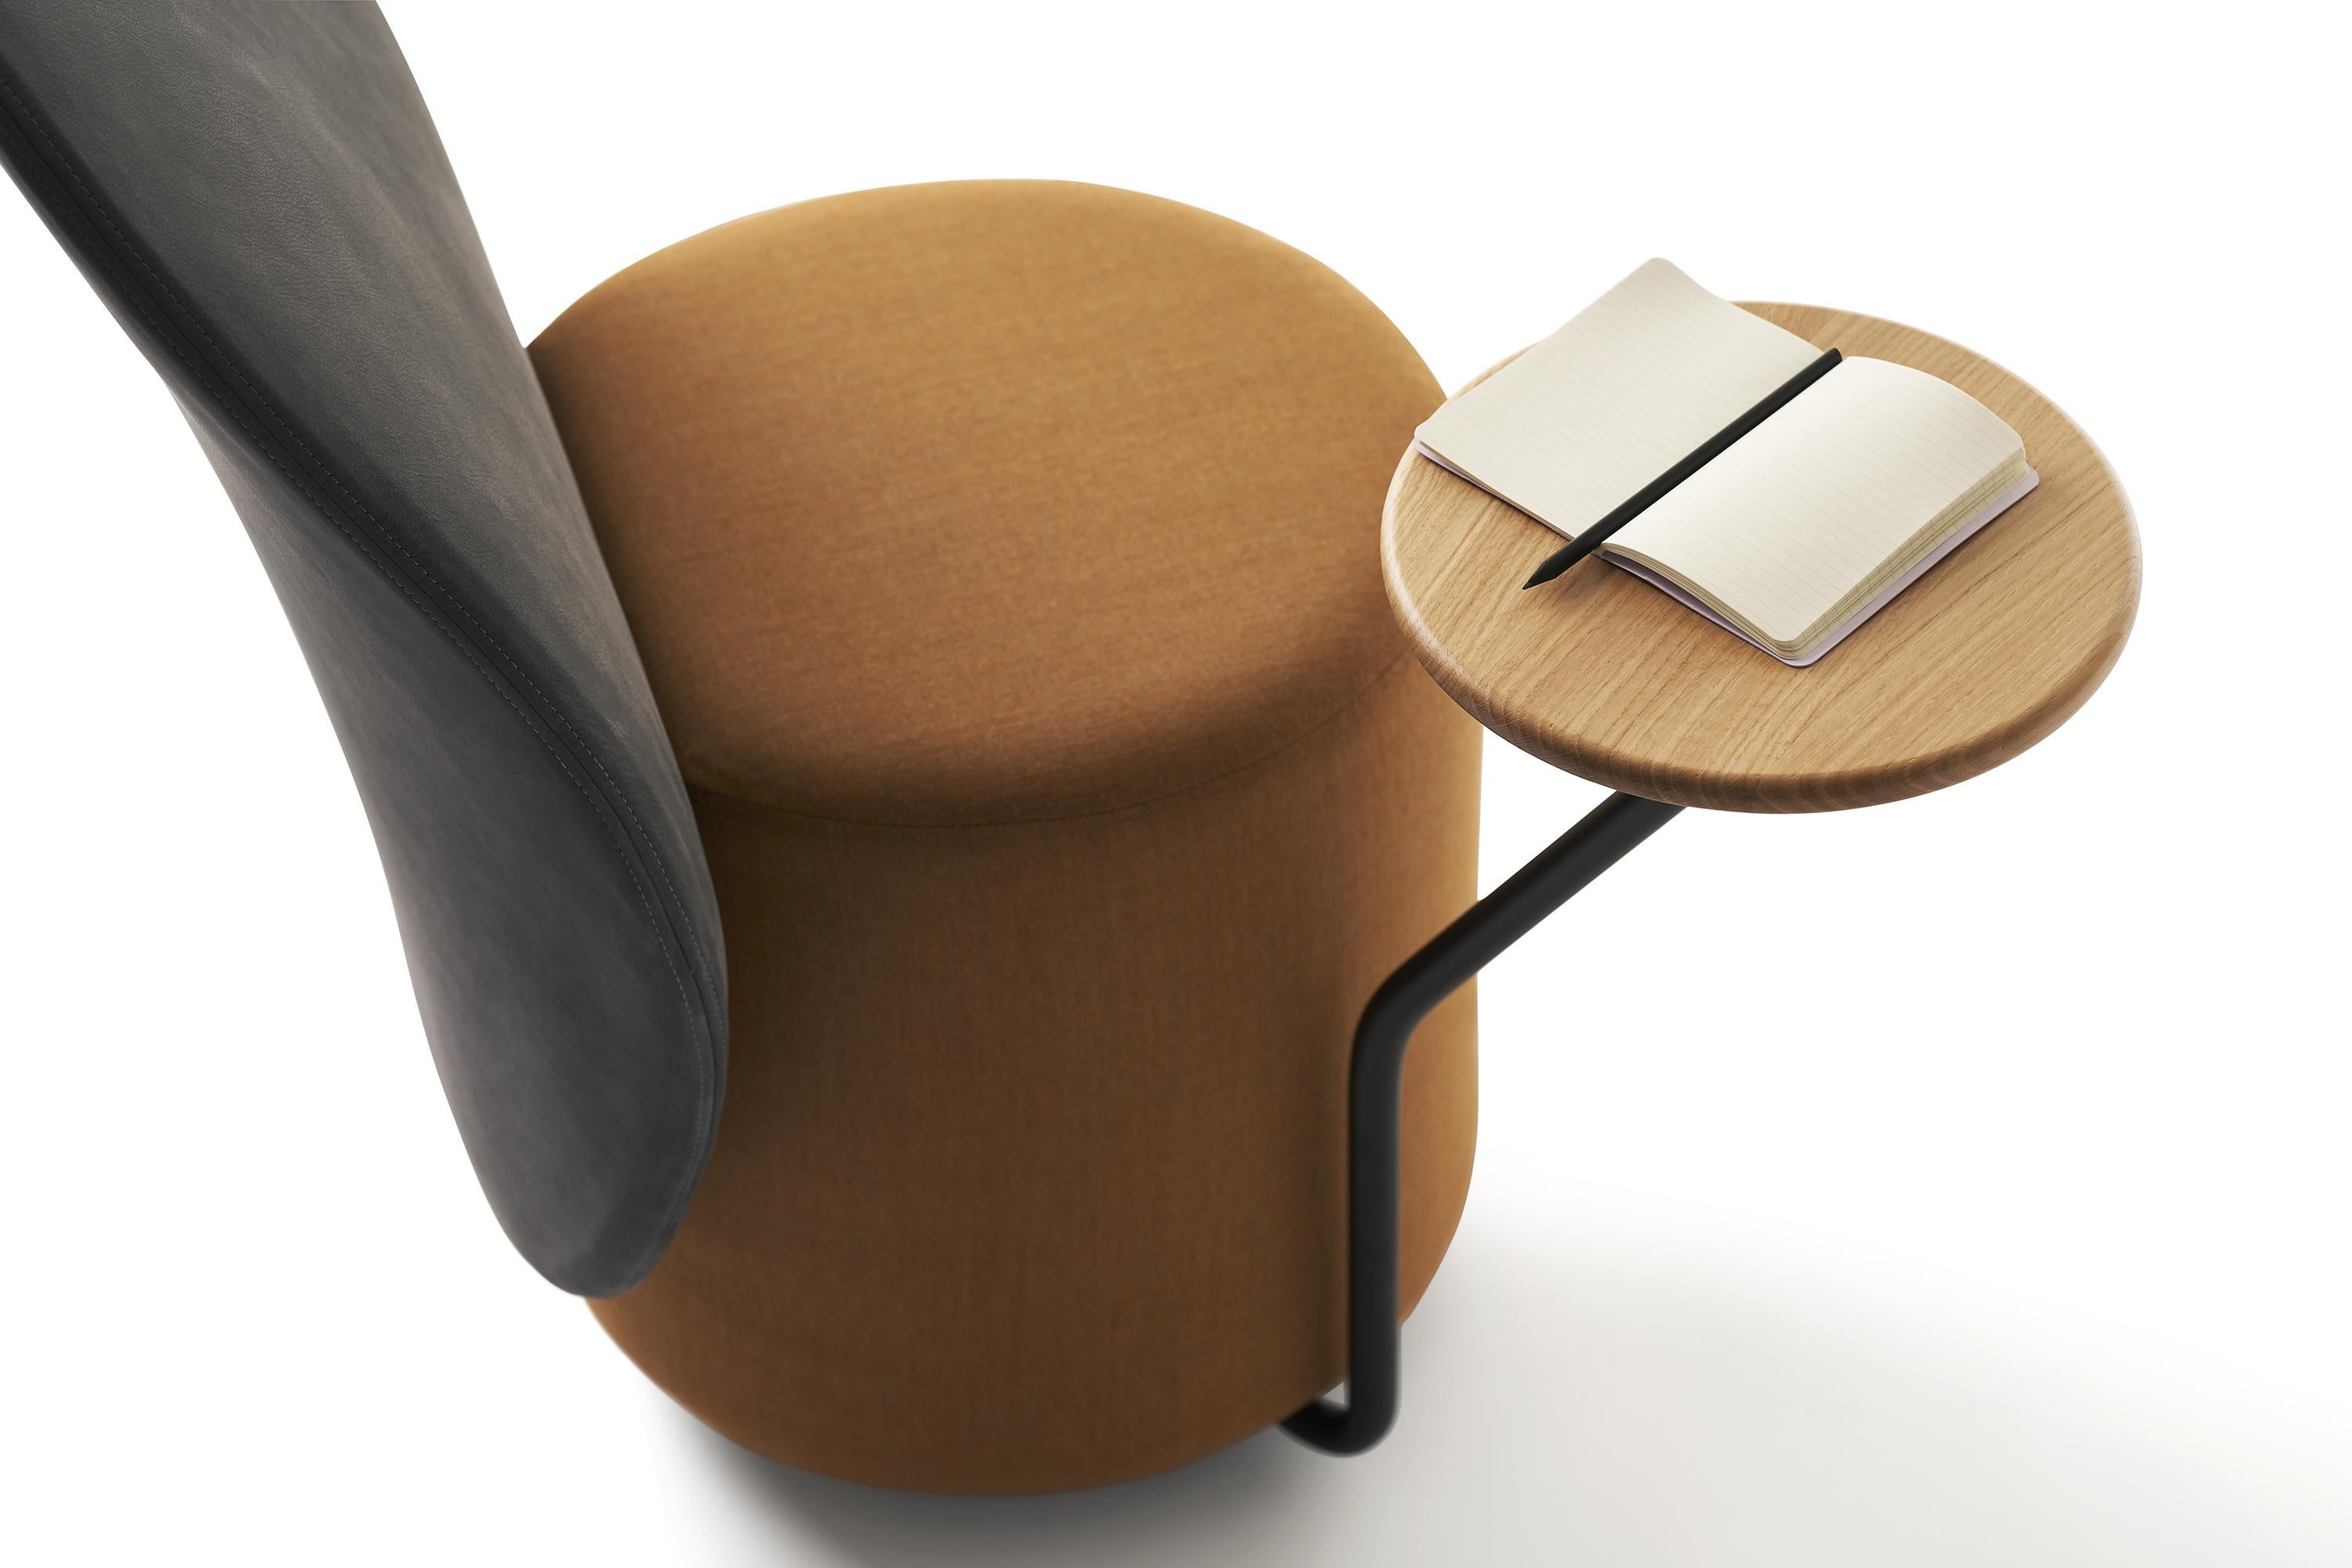 Loomi is the padded seat by Lapo Ciatti designed to meet the many needs of our daily life. Larger than a chair, less bulky than an armchair. A comfortable place to snuggle up, a small corner of the world in which to retreat, to relax or work, study